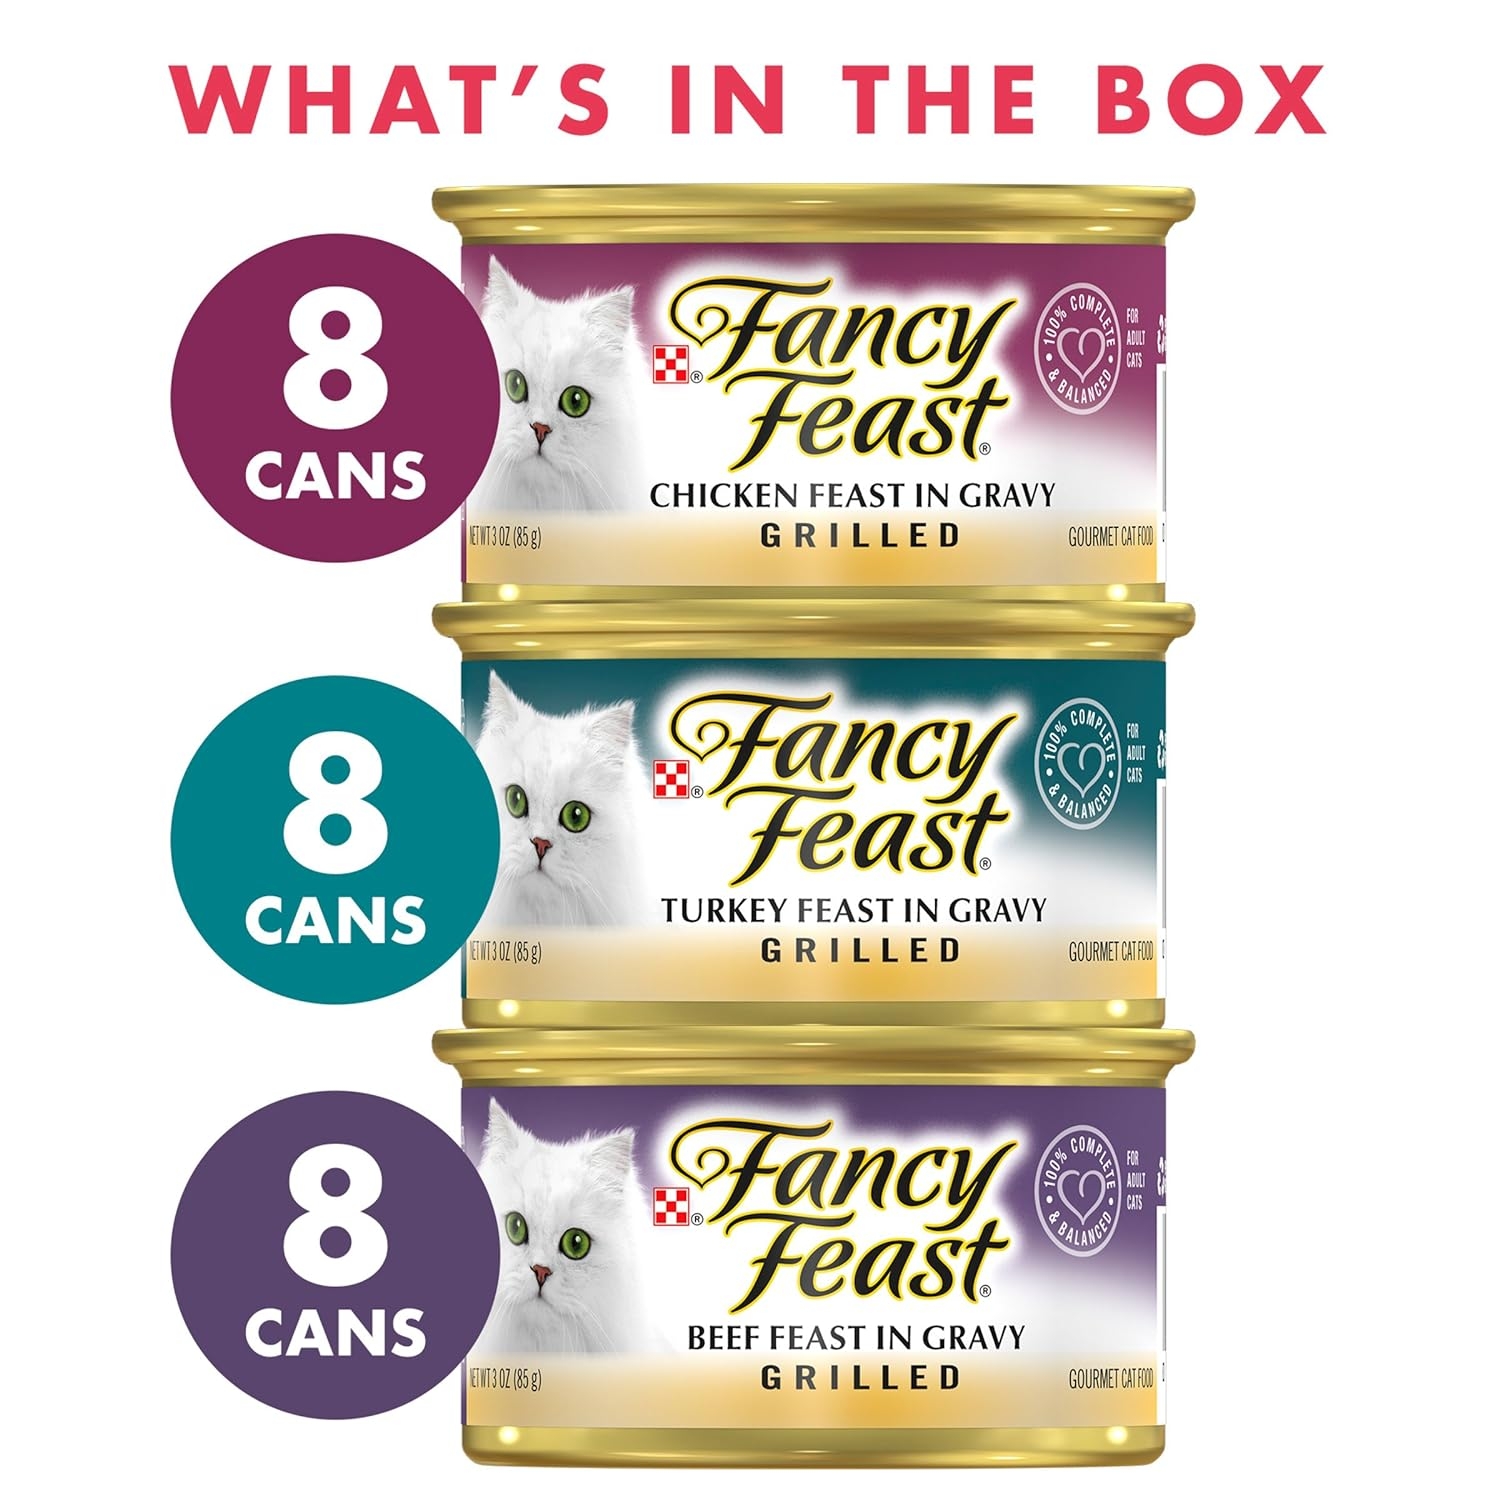 Purina Fancy Feast Grilled Poultry & Beef Collection Wet Cat Food Variety Pack - (24) 3 oz. Cans